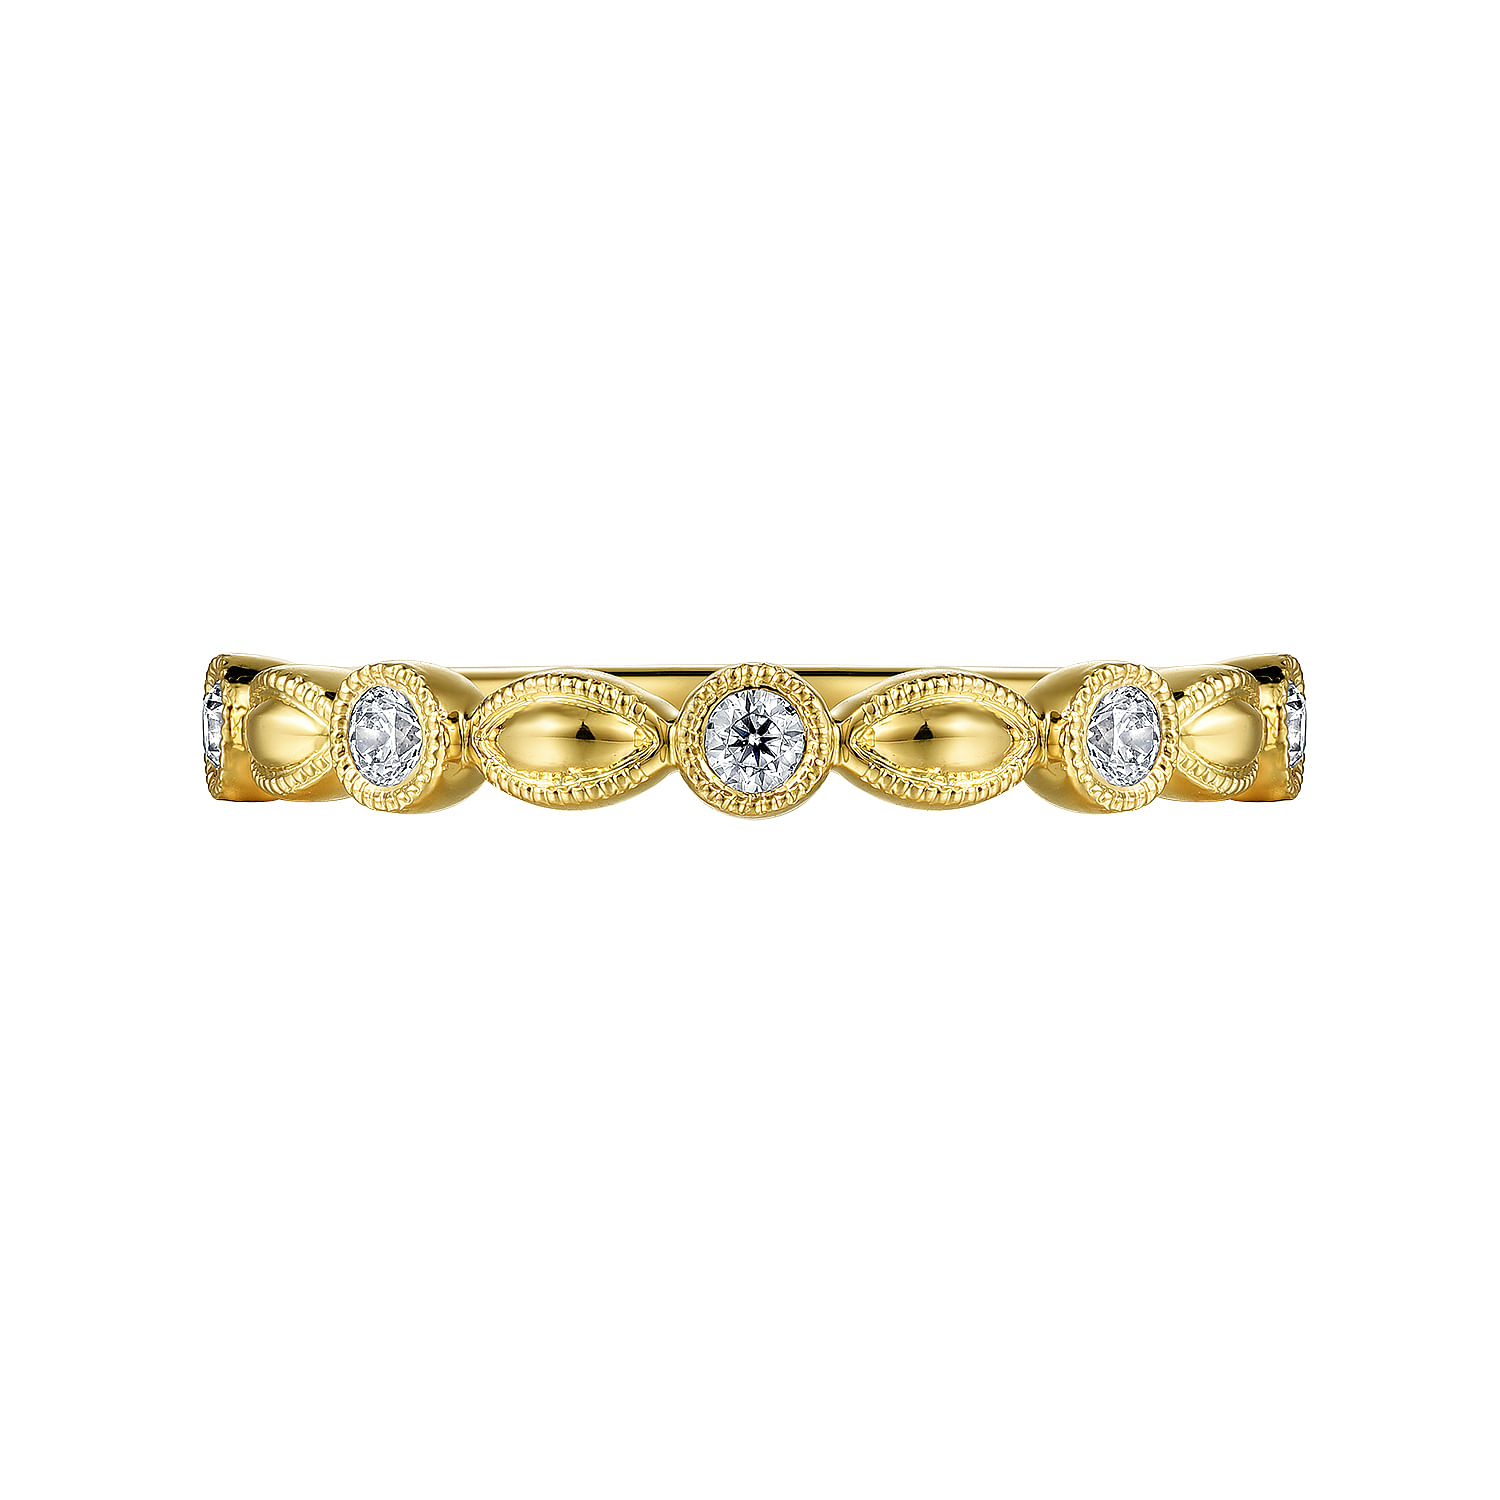 14K Yellow Gold Diamond Marquise Shape Stackable Ring